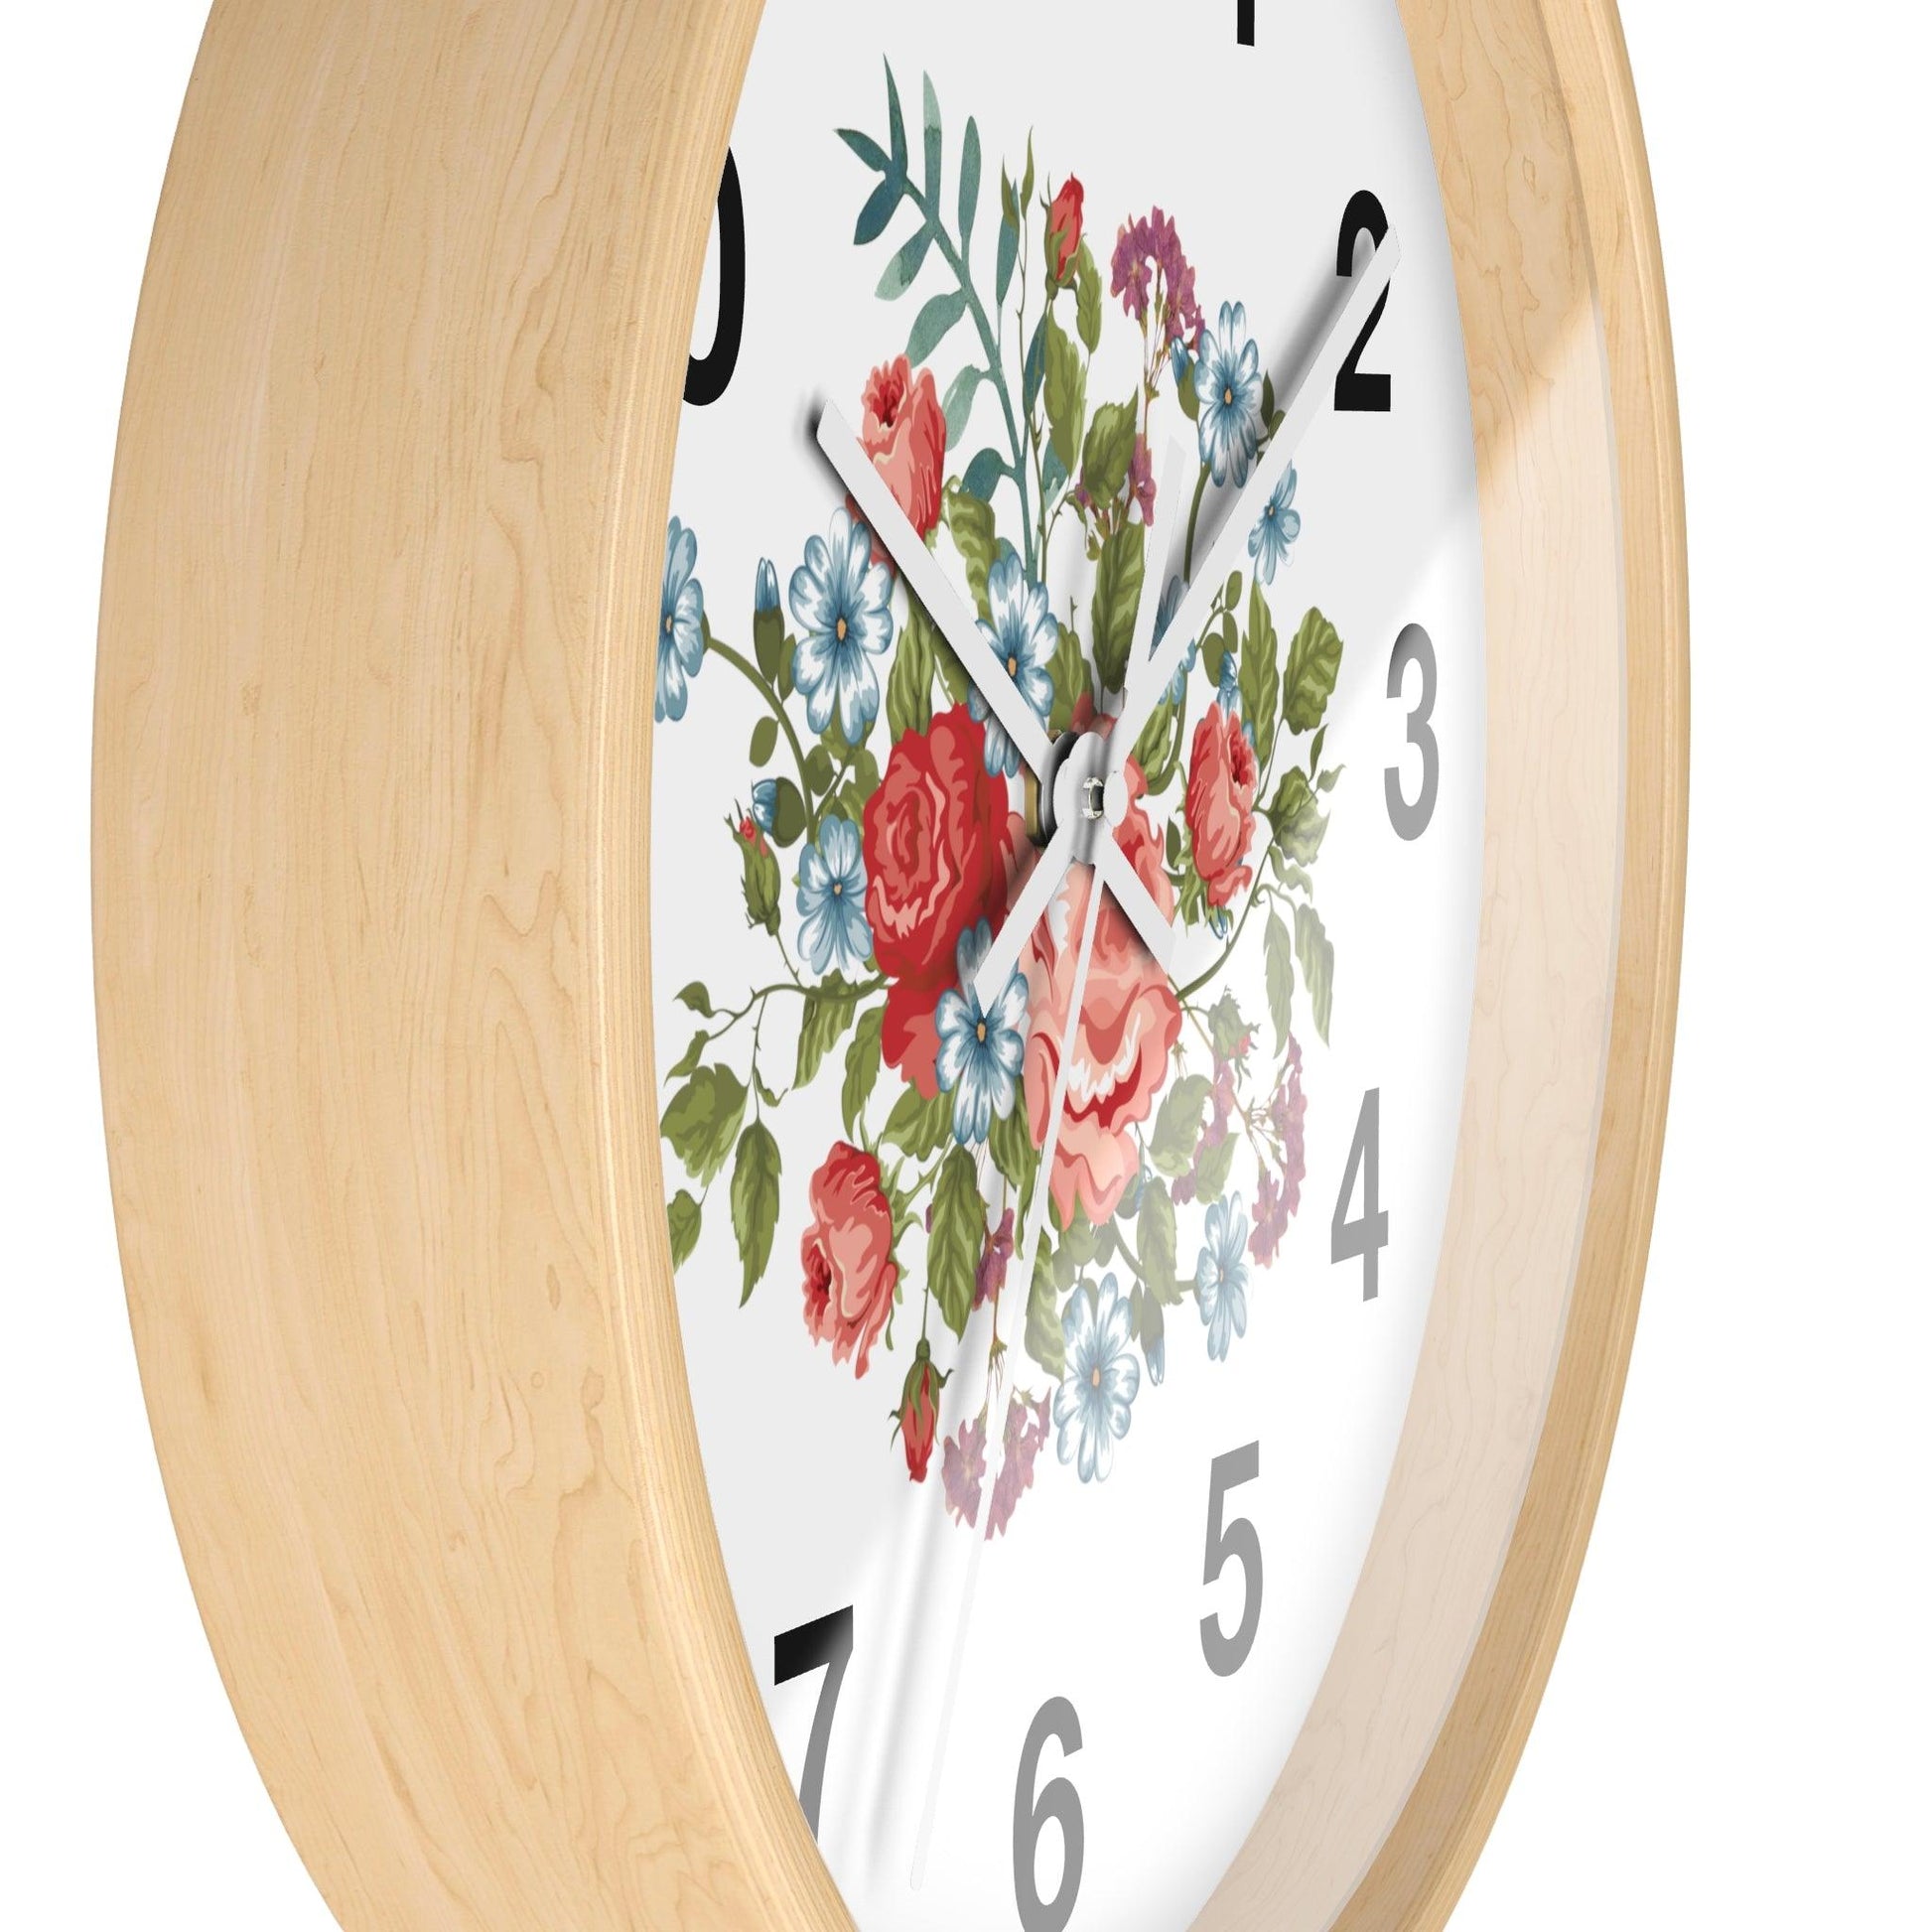 Flower Wall Clock Floral Wall Clock Home Decor Gift House Warming Gift- New Home Gift Mom Gift Farmhouse Clocks For Wall Living Room Bedroom - Giftsmojo